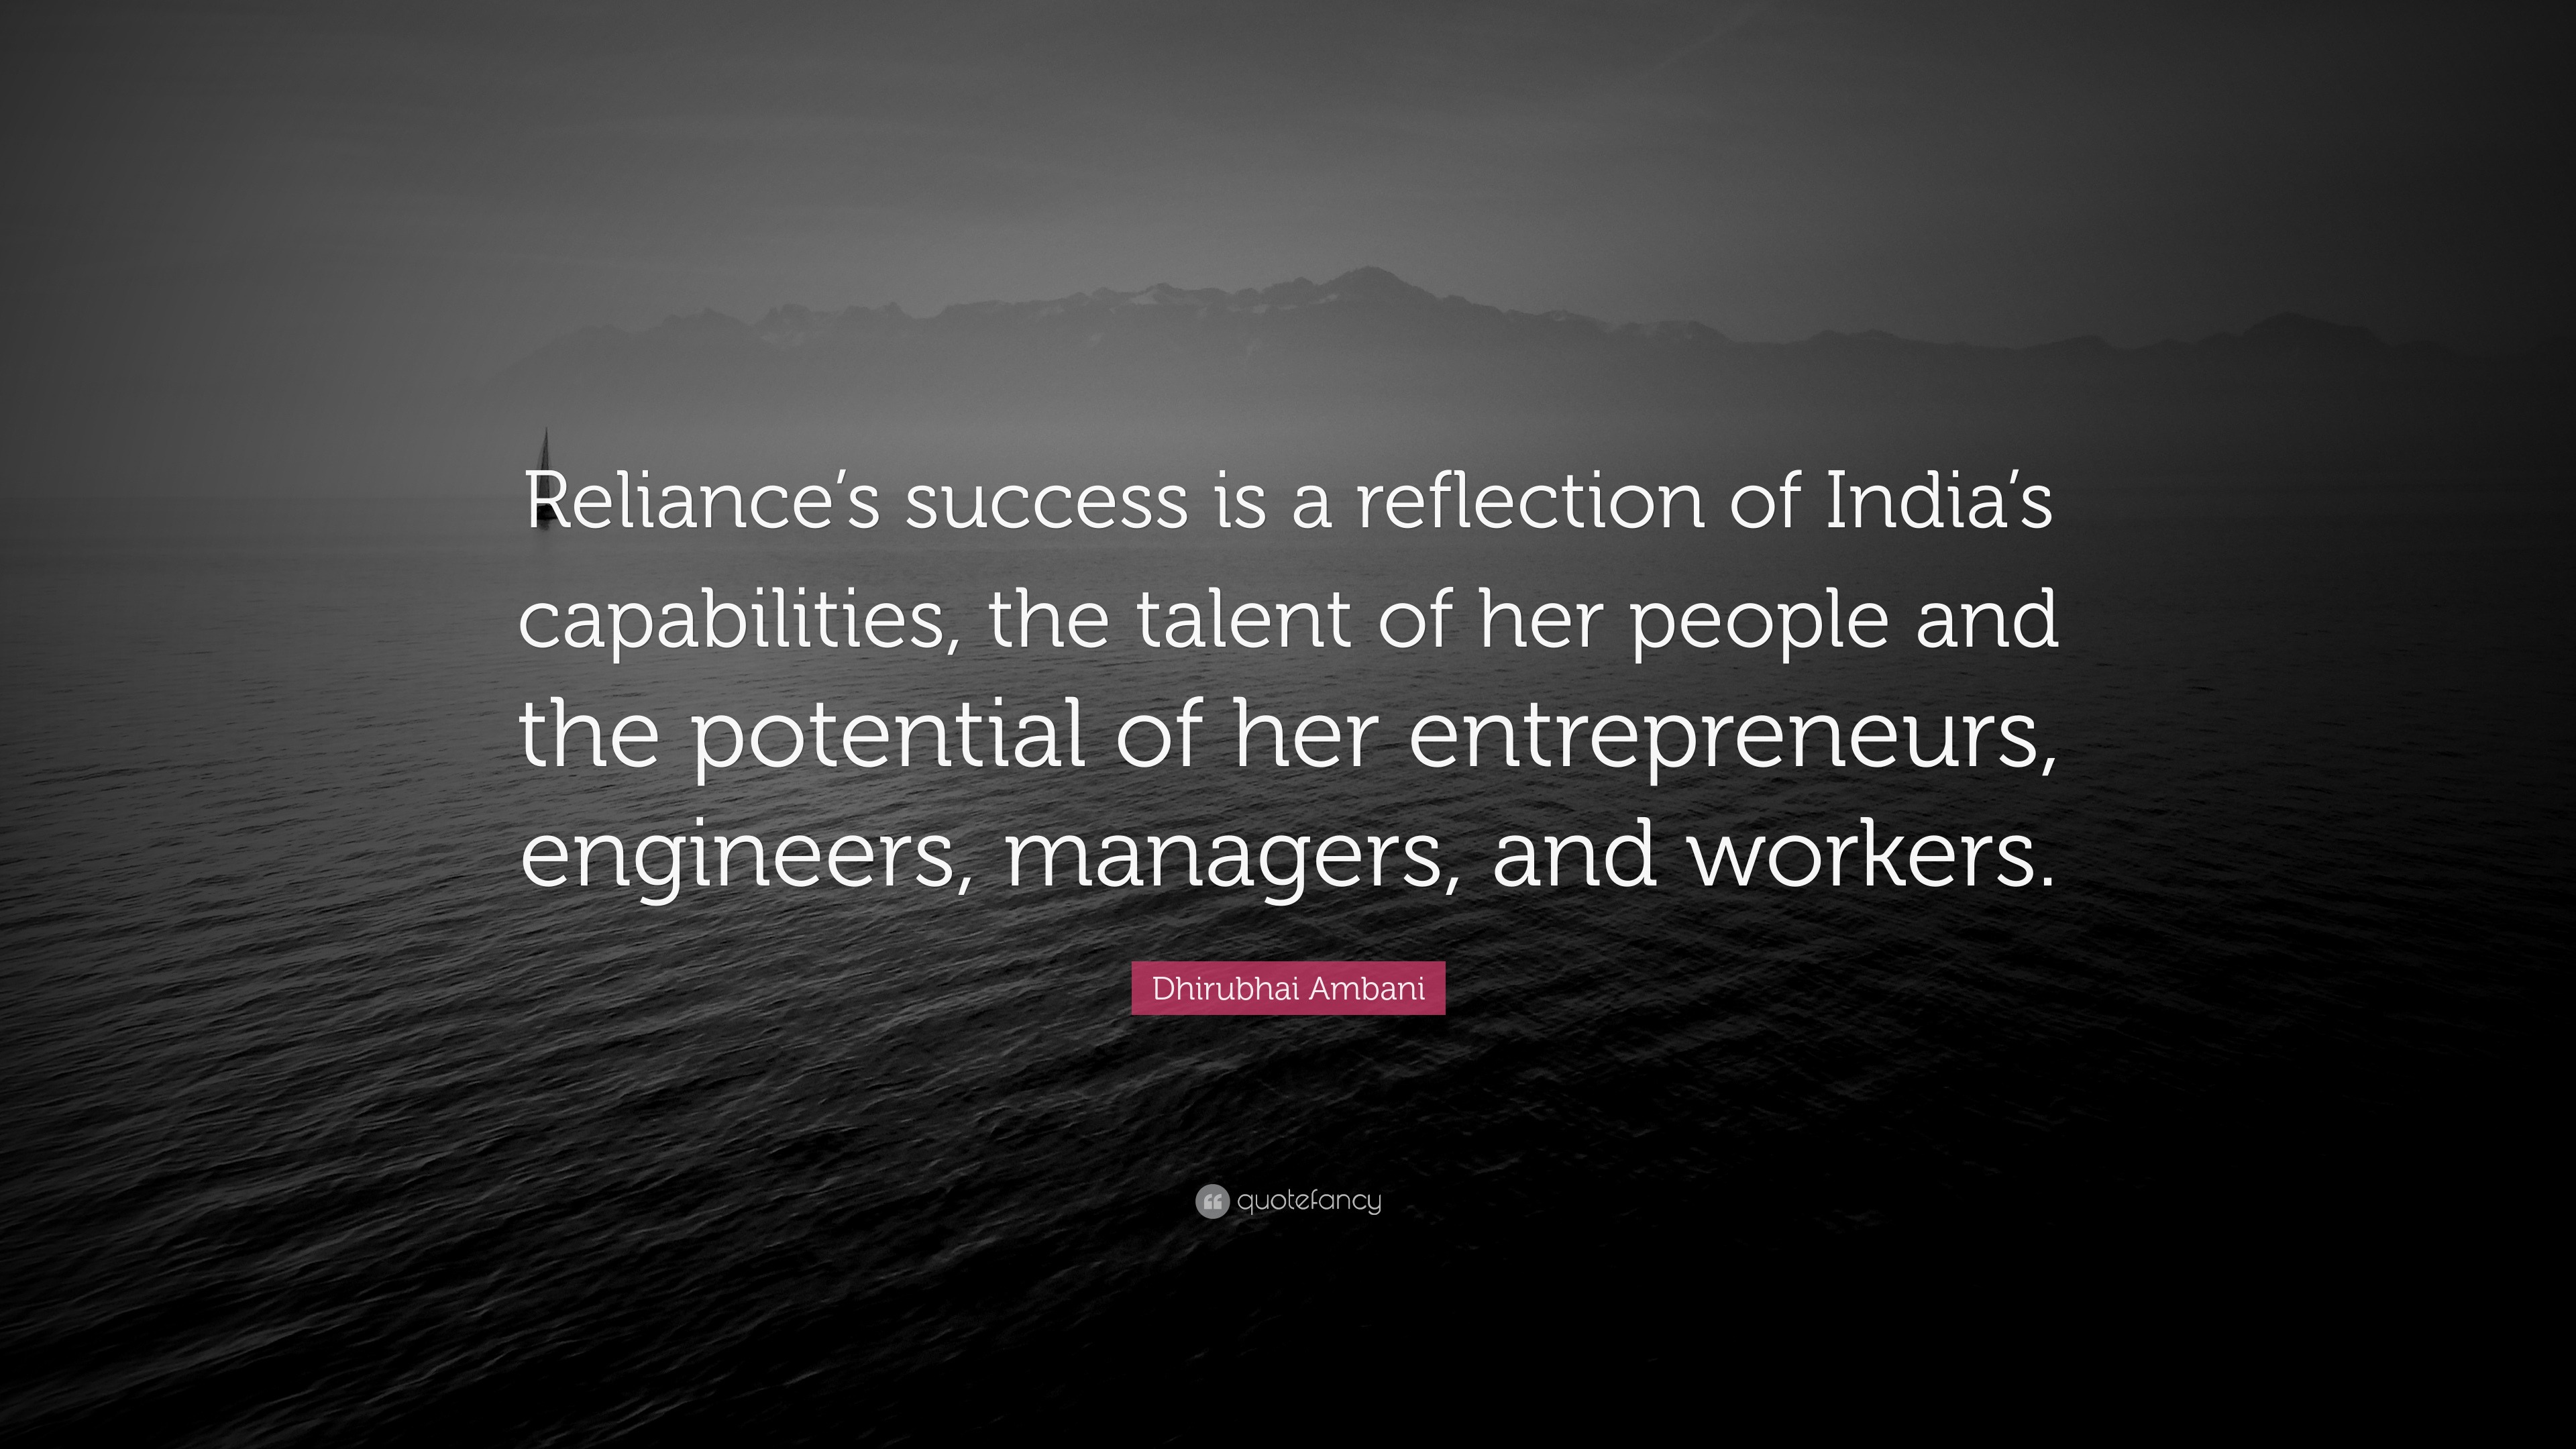 Dhiru bhai Ambani Quotes Inspirational Thoughts Wallpapers Images Pictures   Inspiring Quotes  Inspirational Motivational Quotations Thoughts  Sayings with Images Anmol Vachan Suvichar Inspirational Stories Essay  Speeches and Motivational 